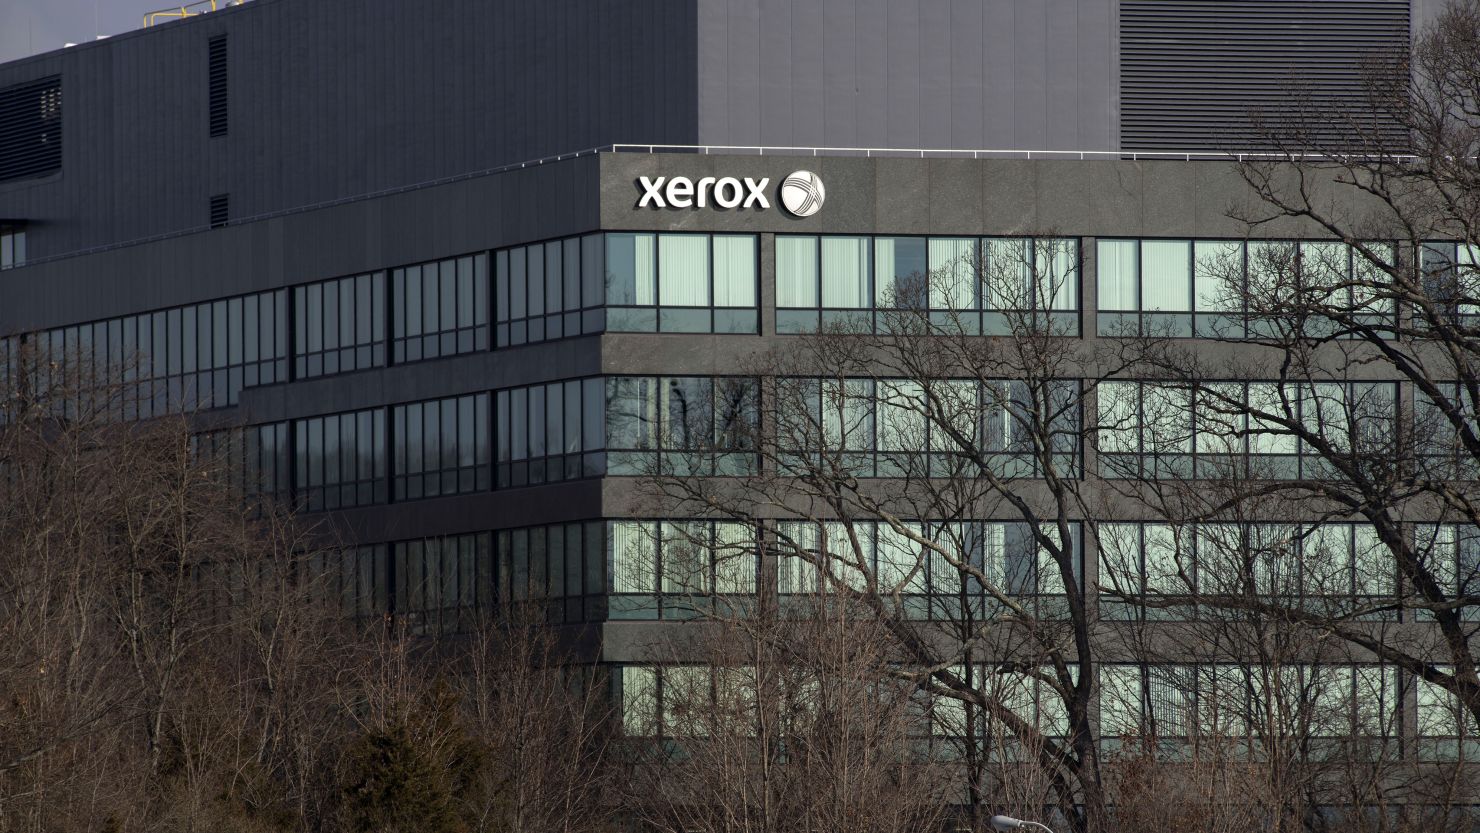 Xerox Corp. headquarters stands in Norwalk, Connecticut, U.S., on Friday, Jan. 29, 2016.